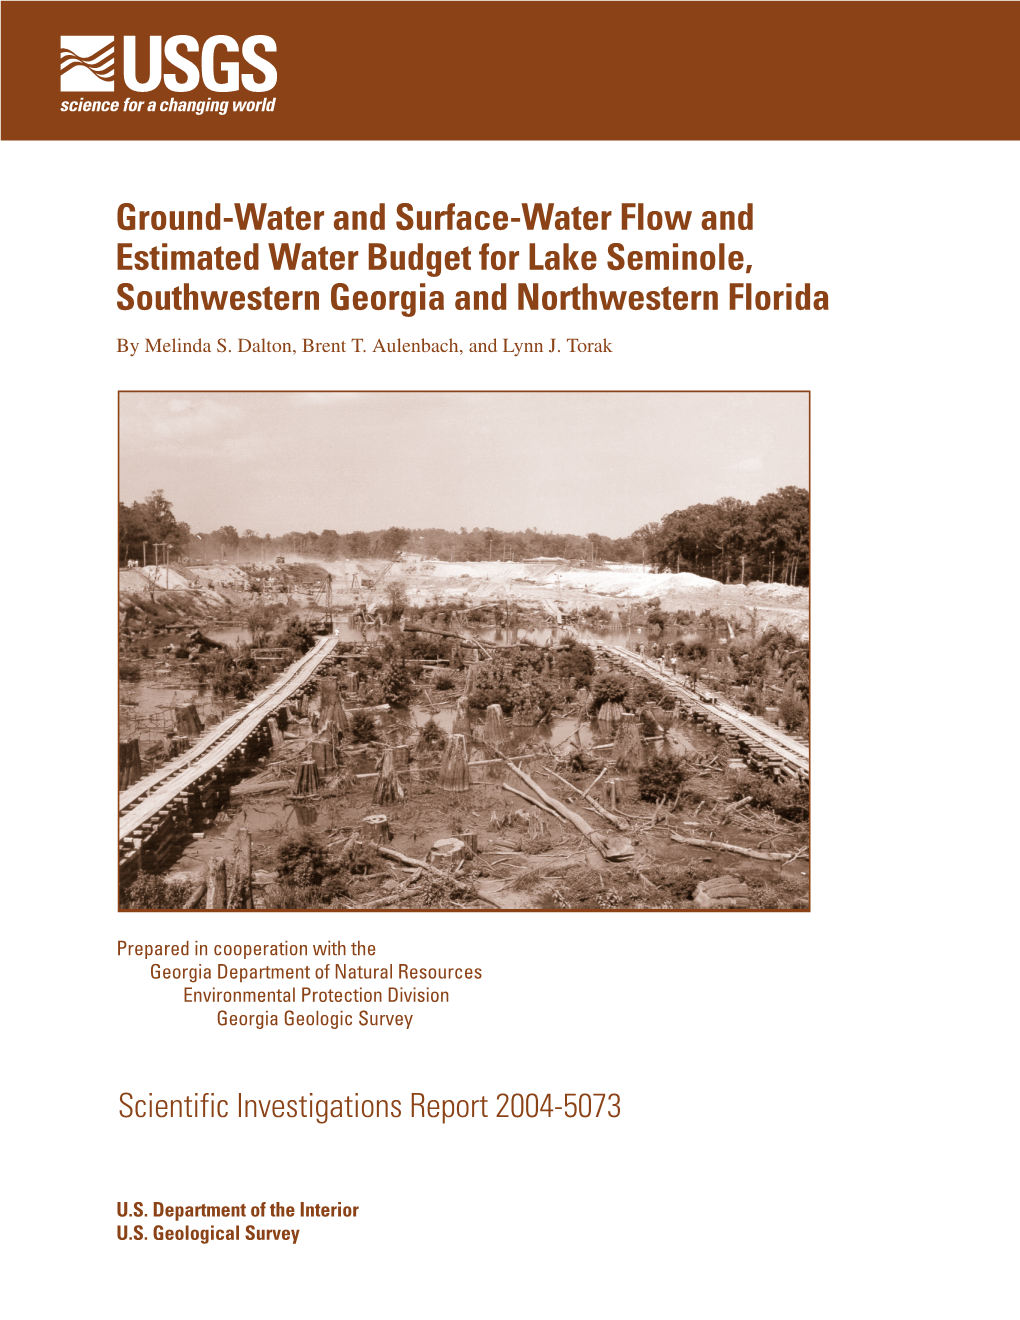 Ground-Water and Surface-Water Flow and Estimated Water Budget for Lake Seminole, Southwestern Georgia and Northwestern Florida by Melinda S